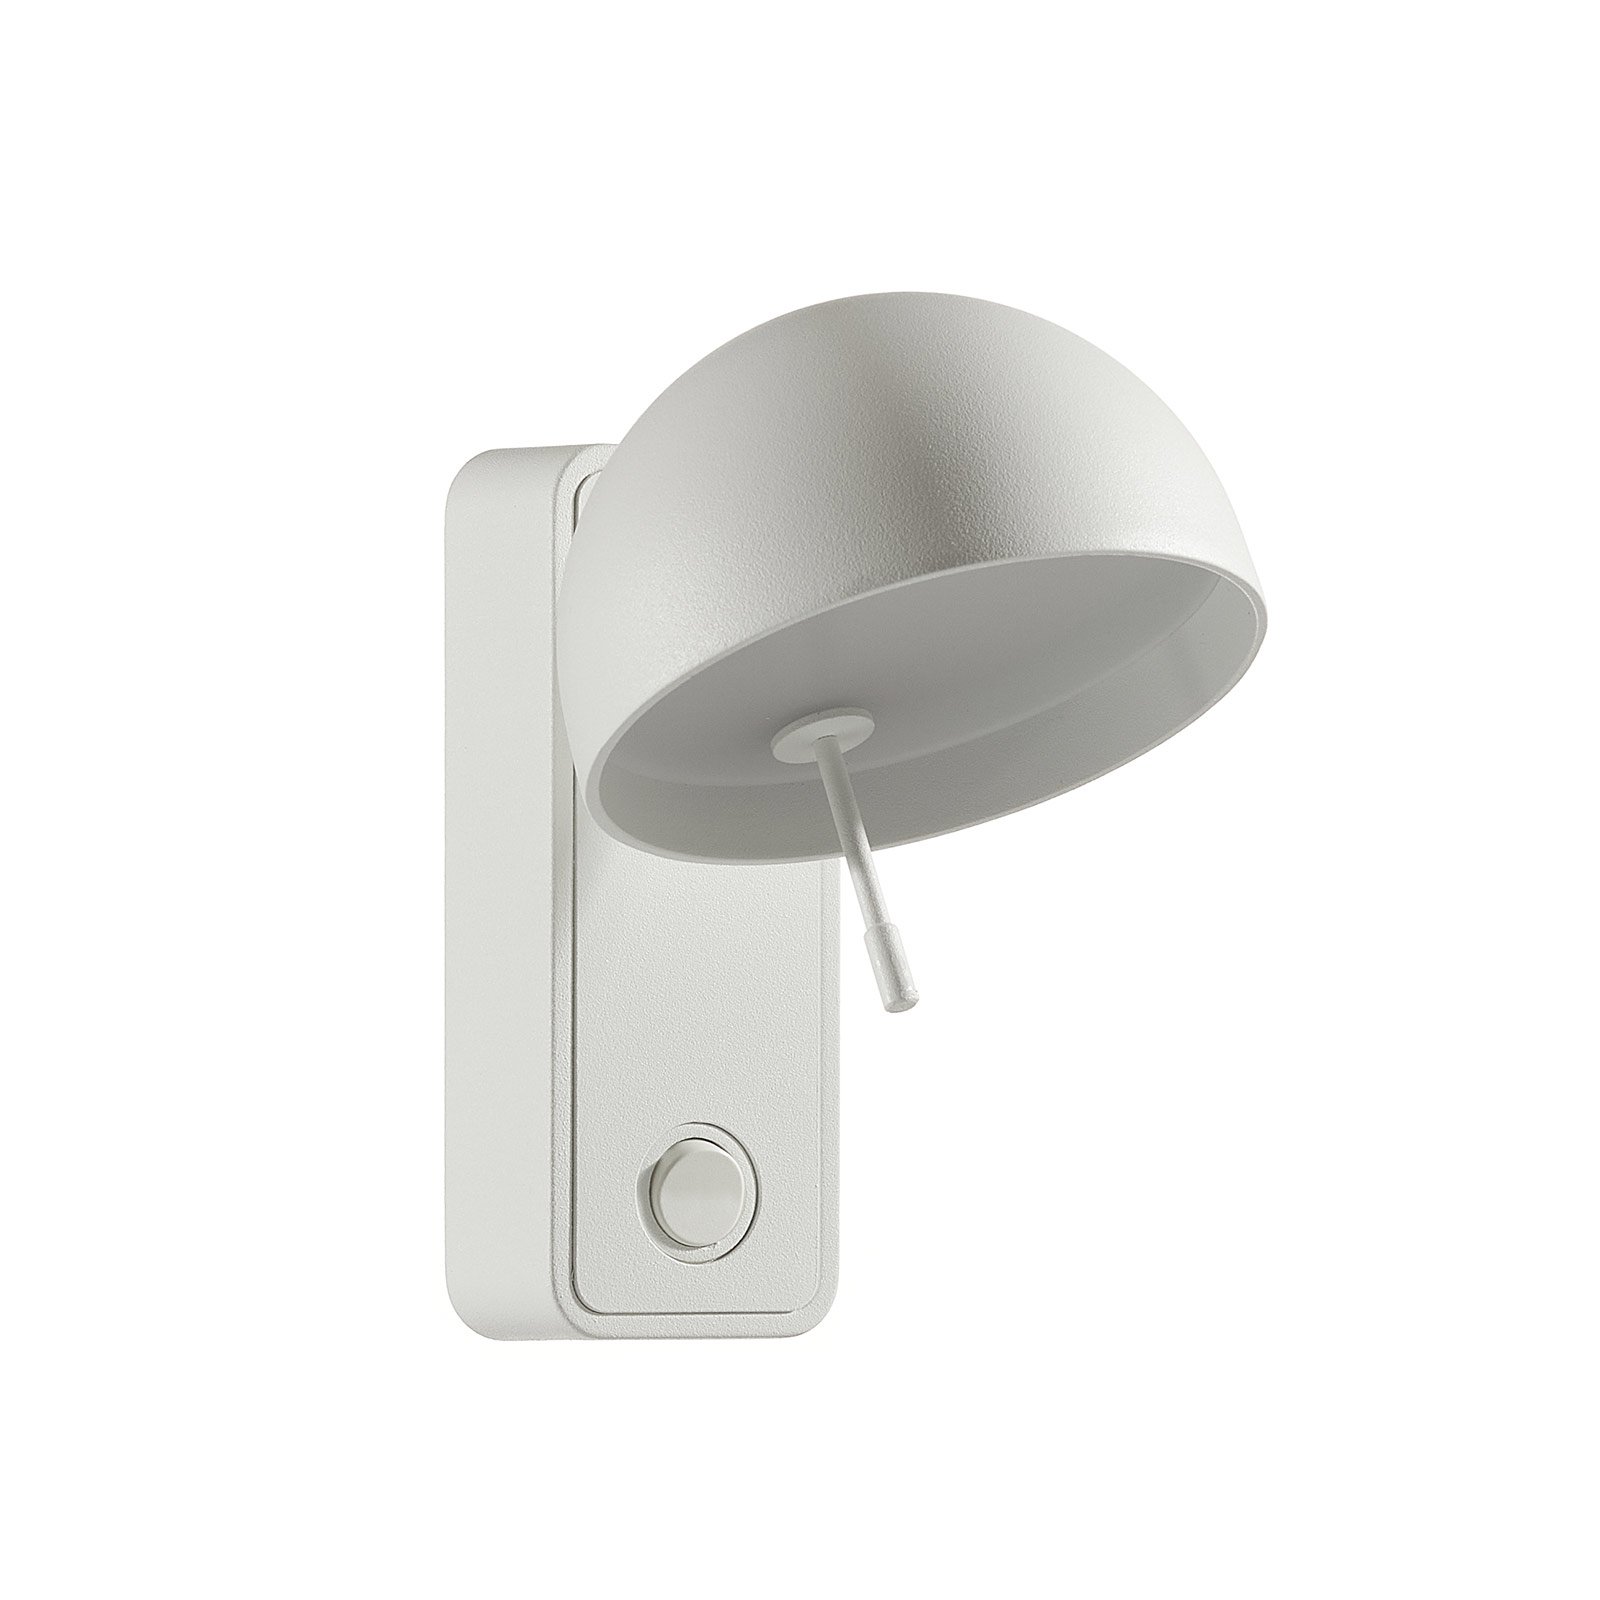 Bover Beddy A/01 wall lamp rotatable white/white